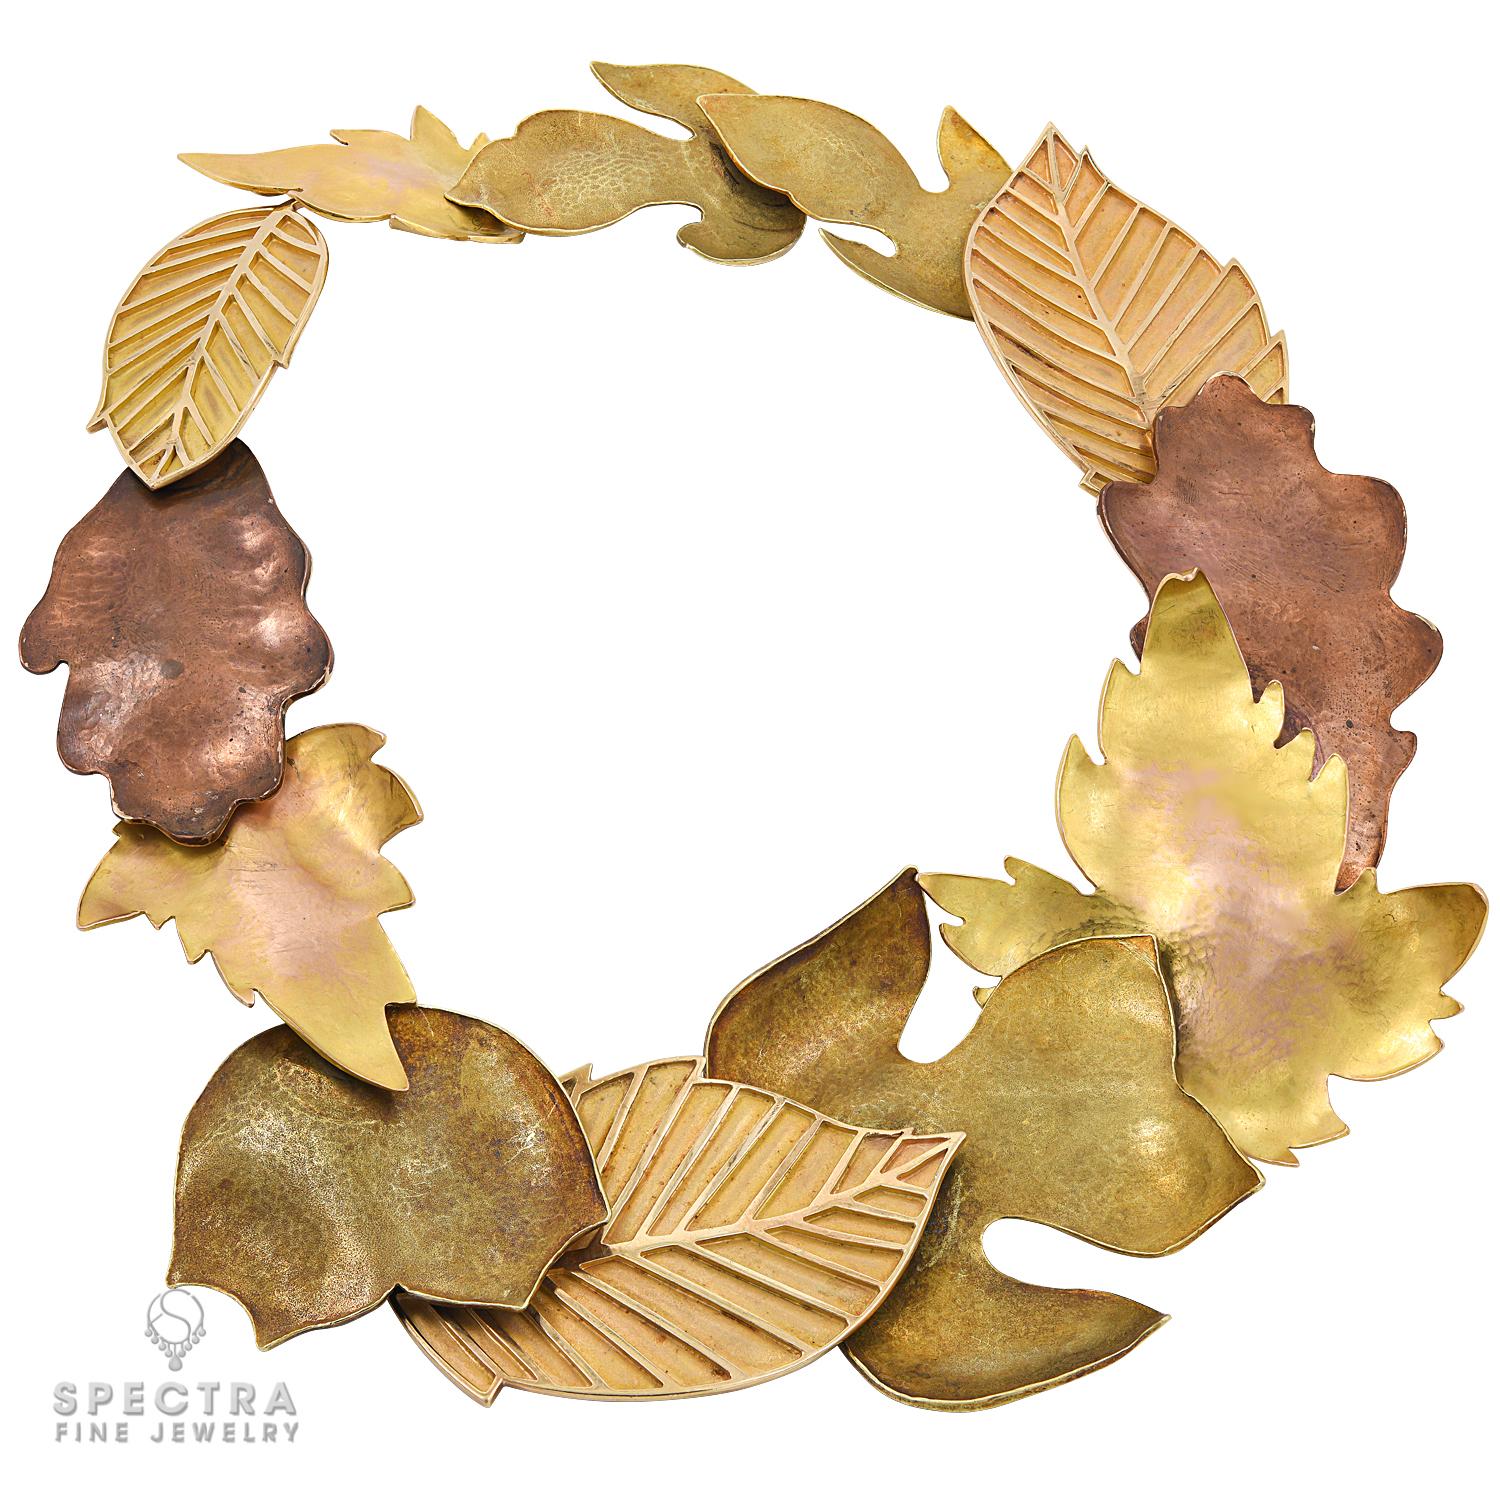 A beautiful necklace with 'leaf' motif created Angela Cummings for Tiffany & Co. in 1981.
Signed Tiffany & Co., Angela Cummings, 1981.
Dimensions: 42 cm (16 1⁄2 in).
Metal is 14k yellow, rose, green gold, copper.
Gross weight 127.20 grams.